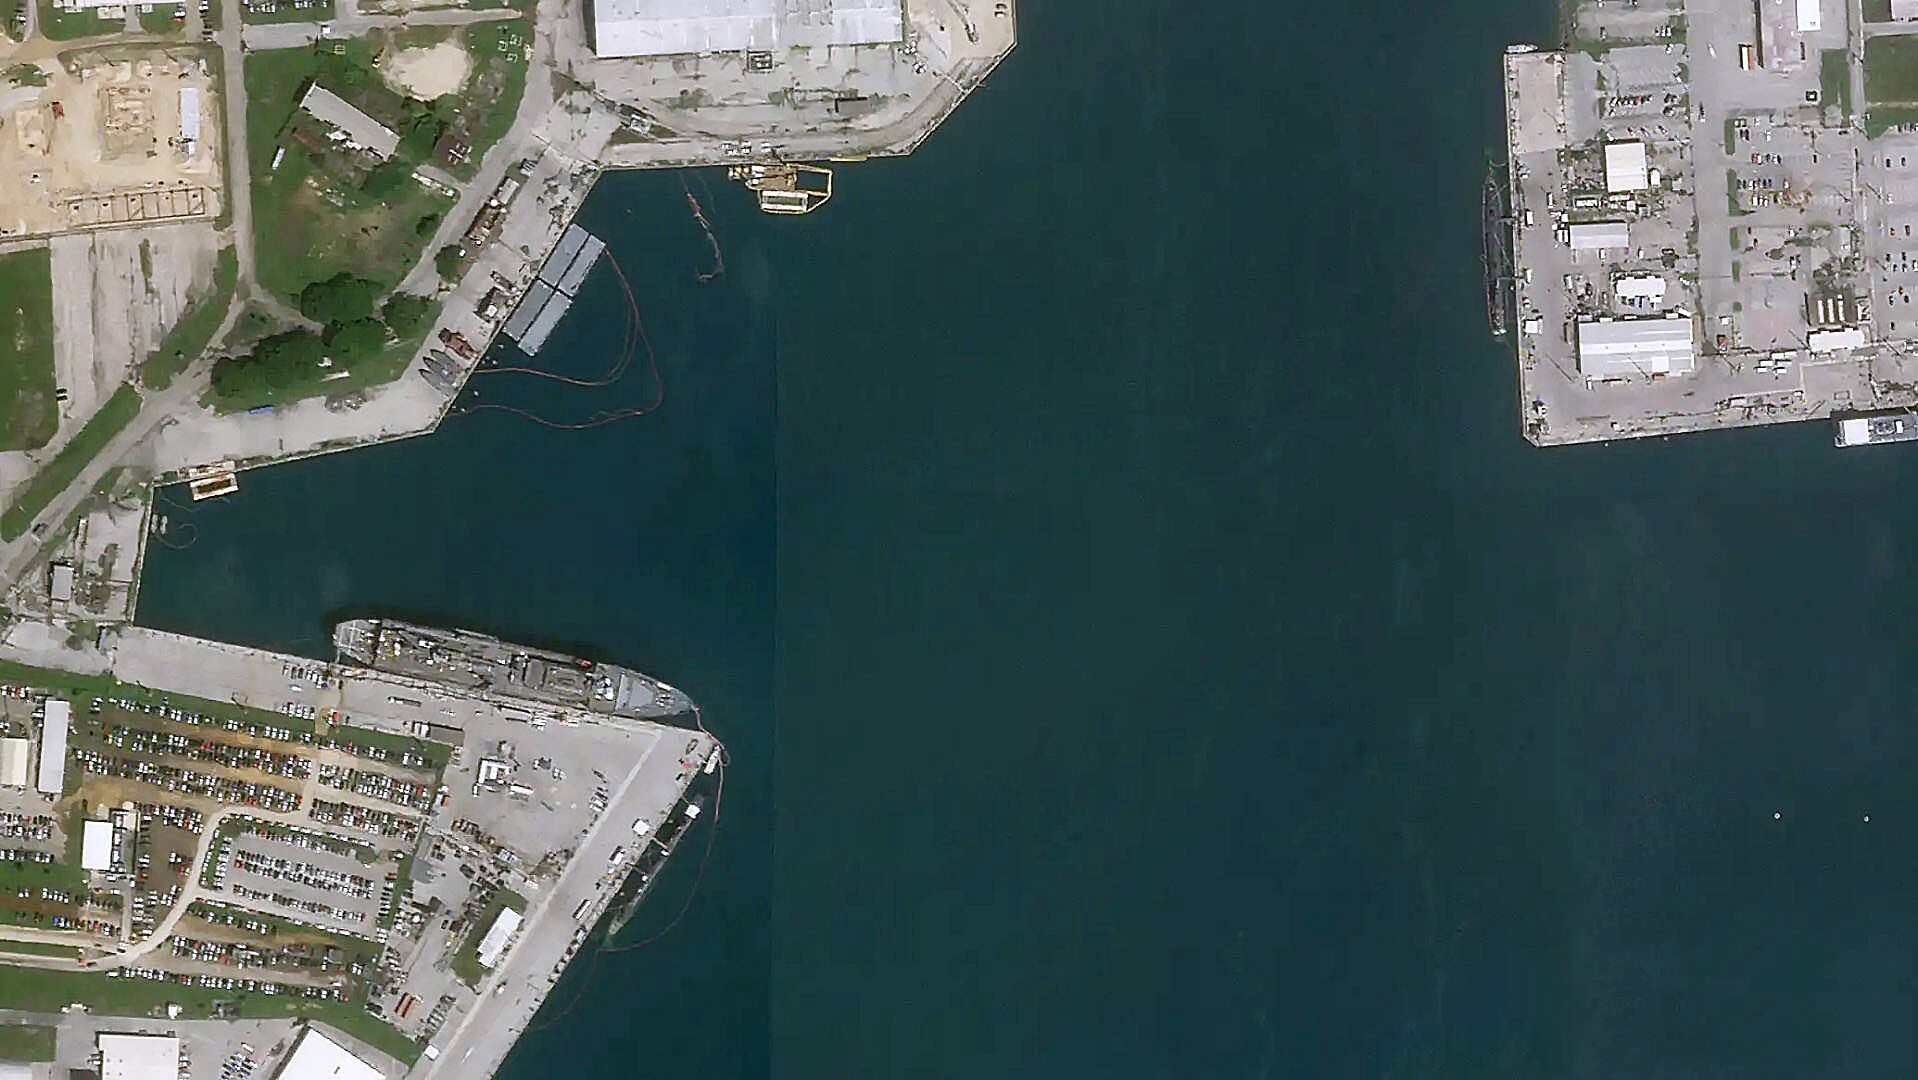 A satellite image shows the USS Connecticut nuclear submarine moored in Guam. Photo: Weibo